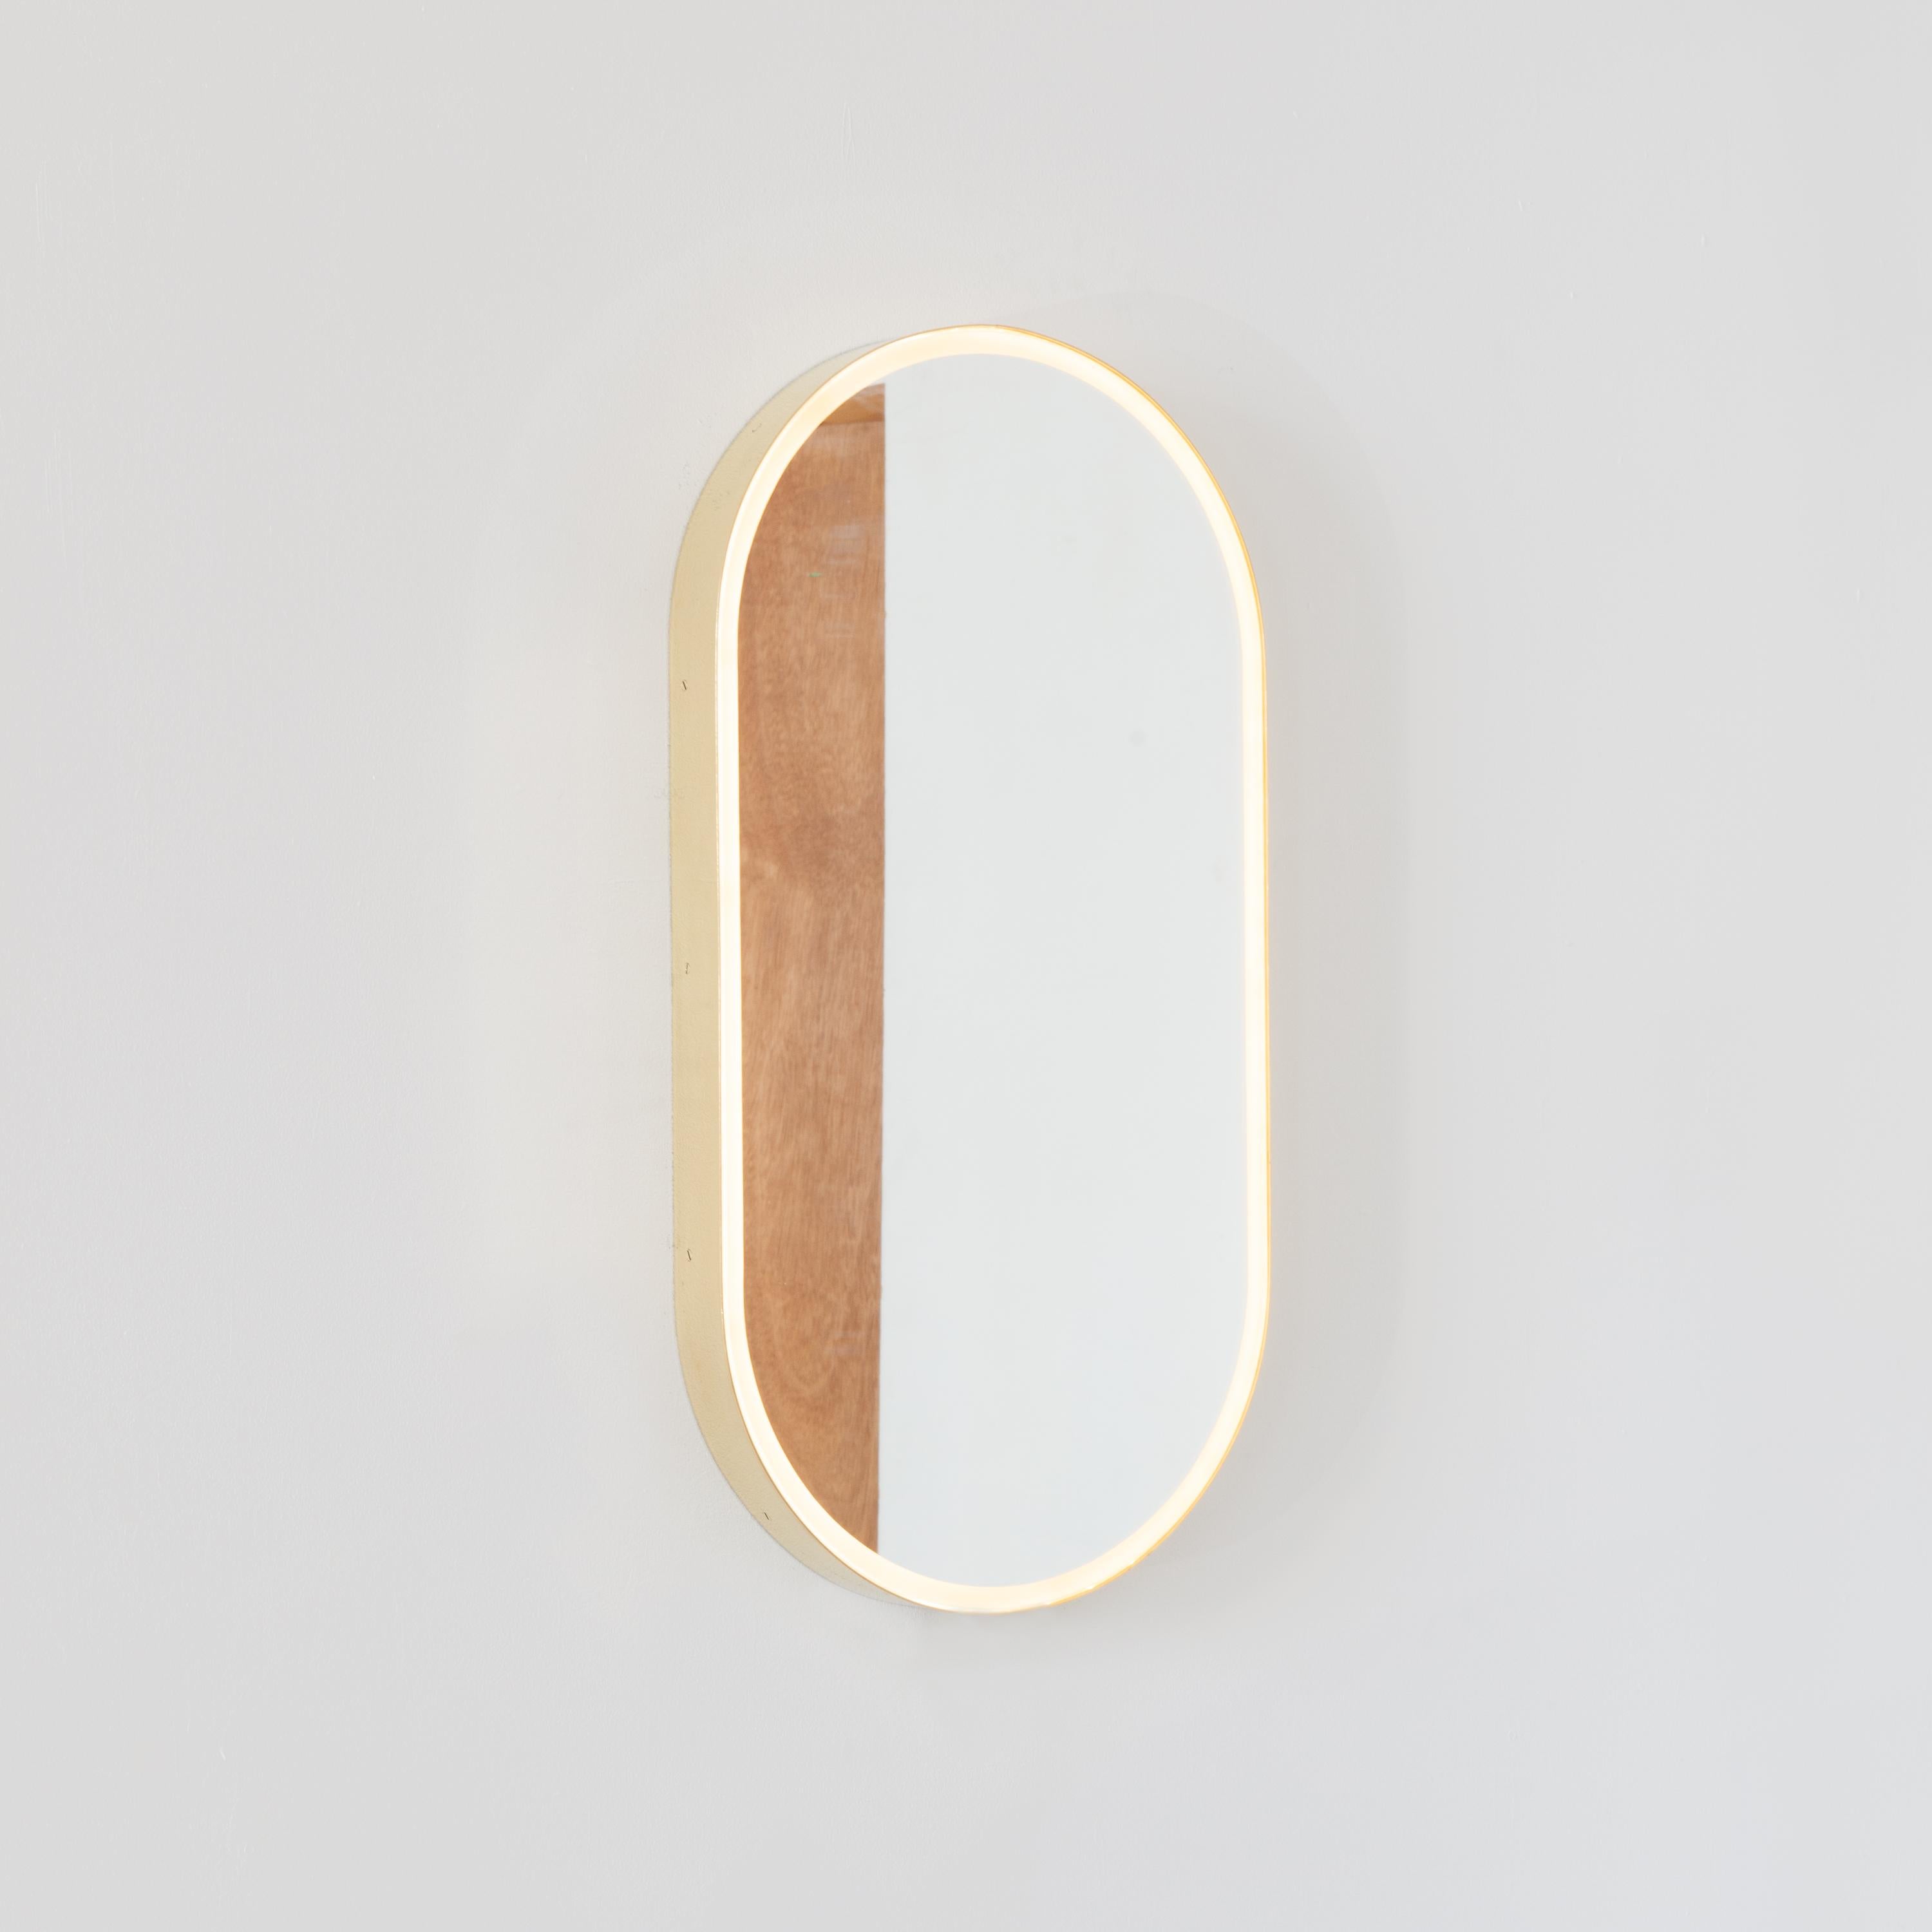 Capsula Illuminated Contemporary Pill Shaped Mirror with Brass Frame, XL For Sale 1